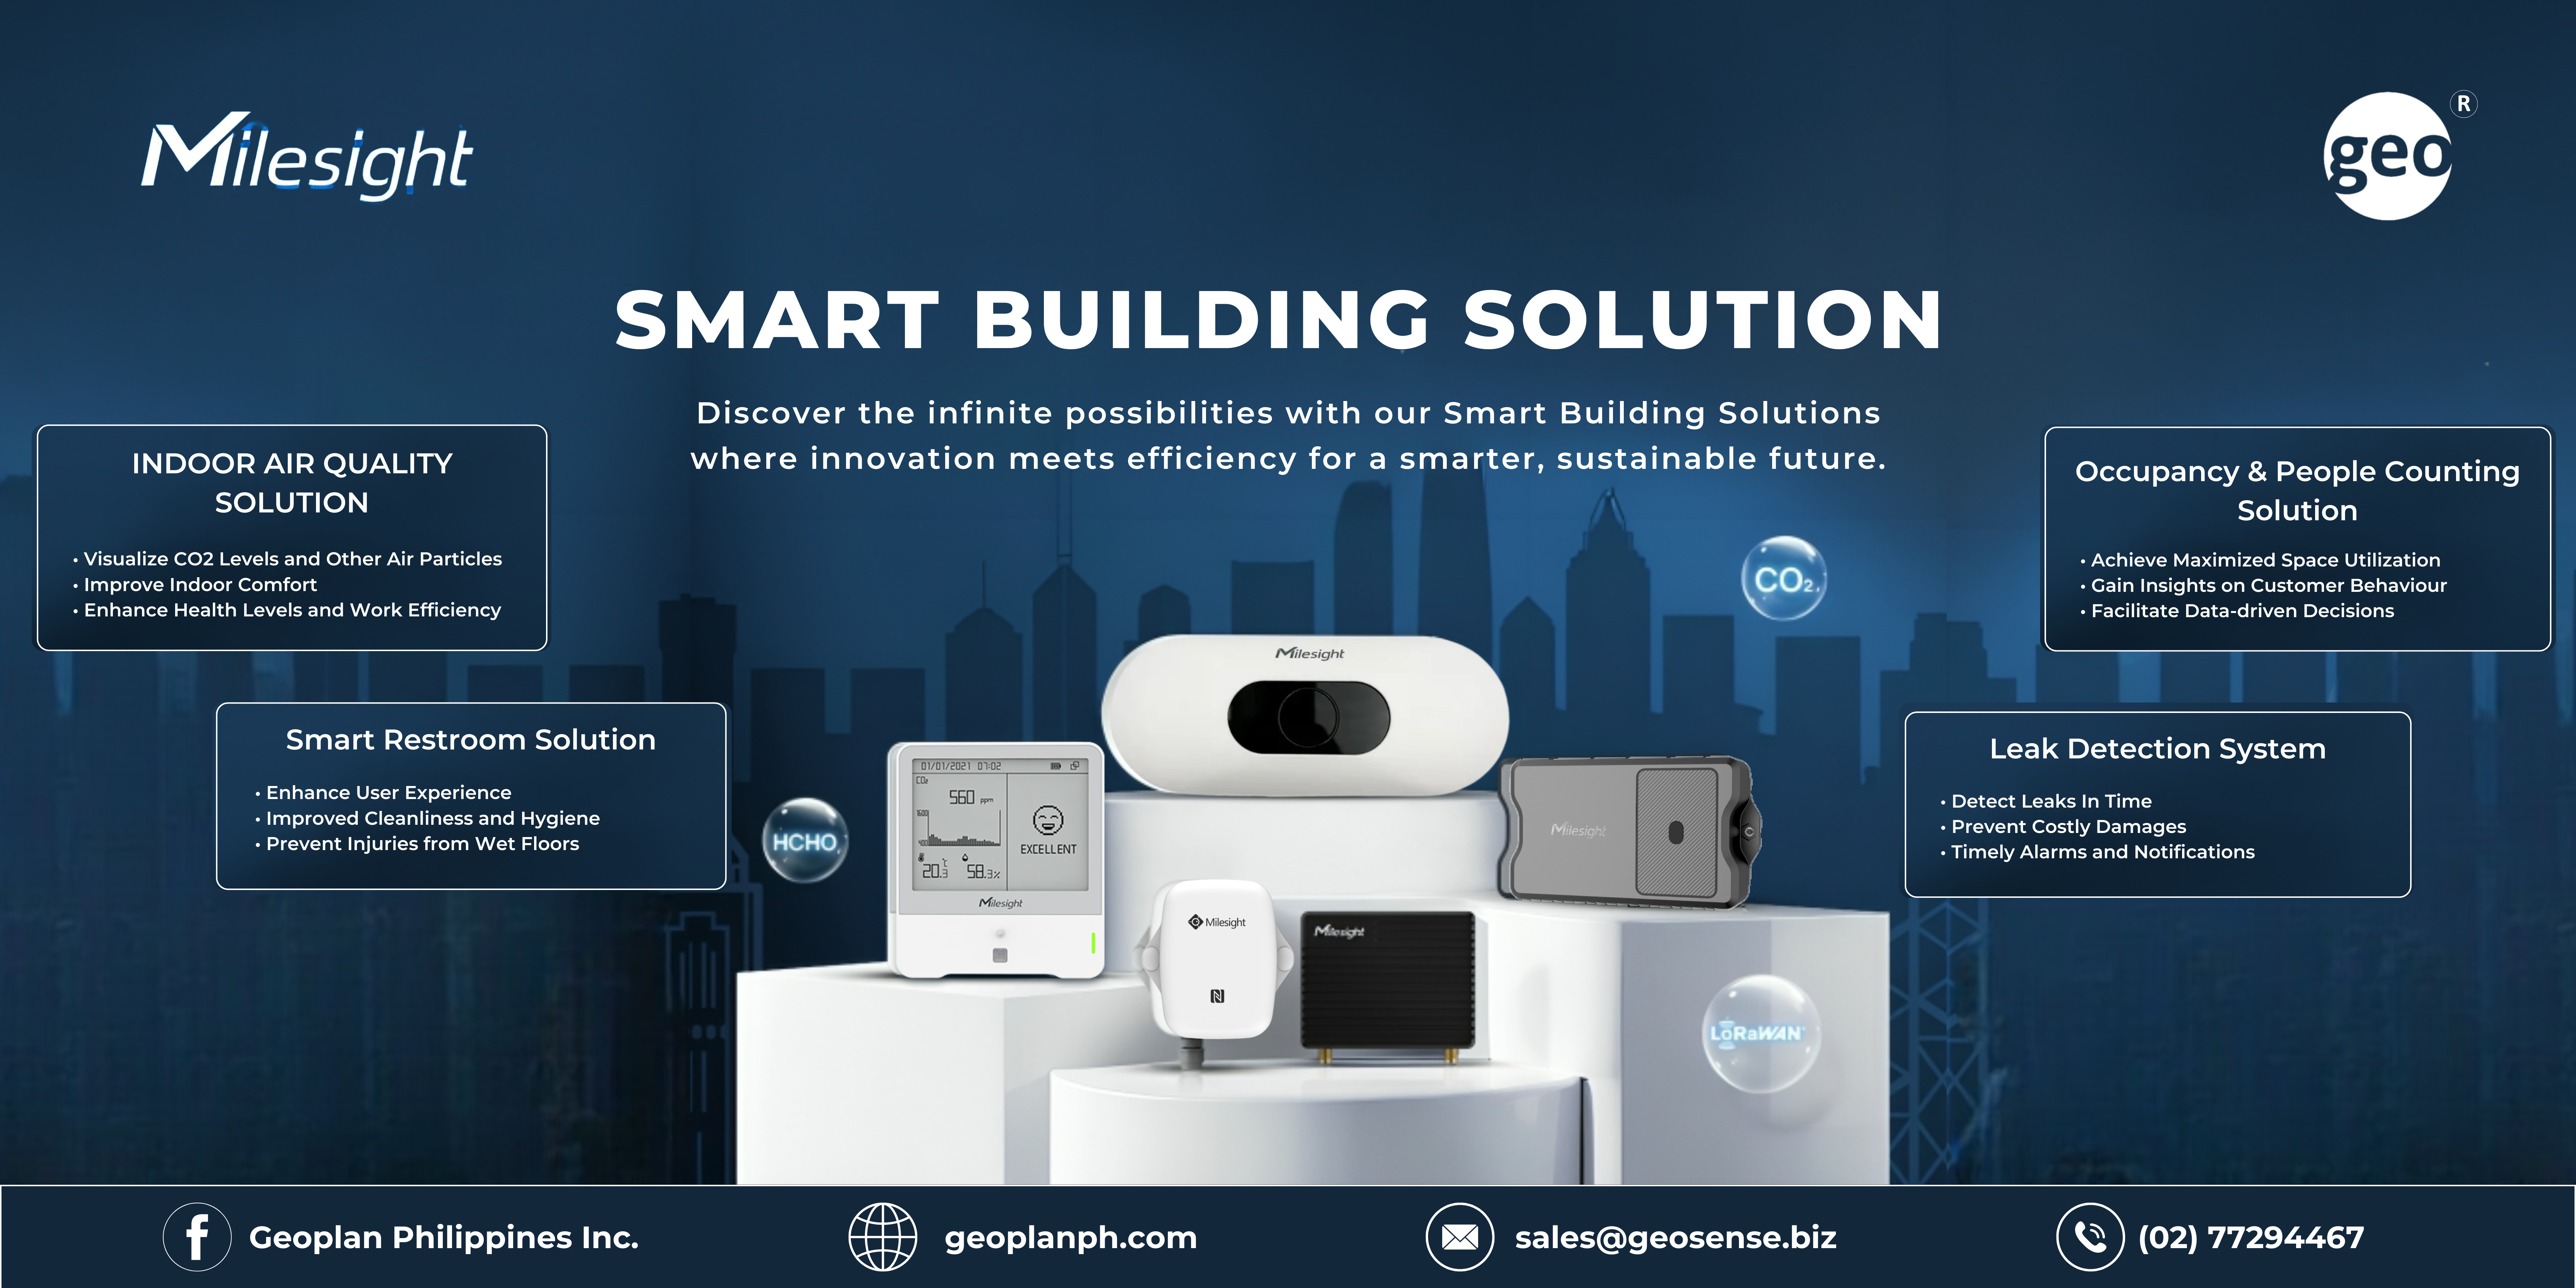 Milesight: Unlock the Infinite Possibilities with Smart Building Solutions